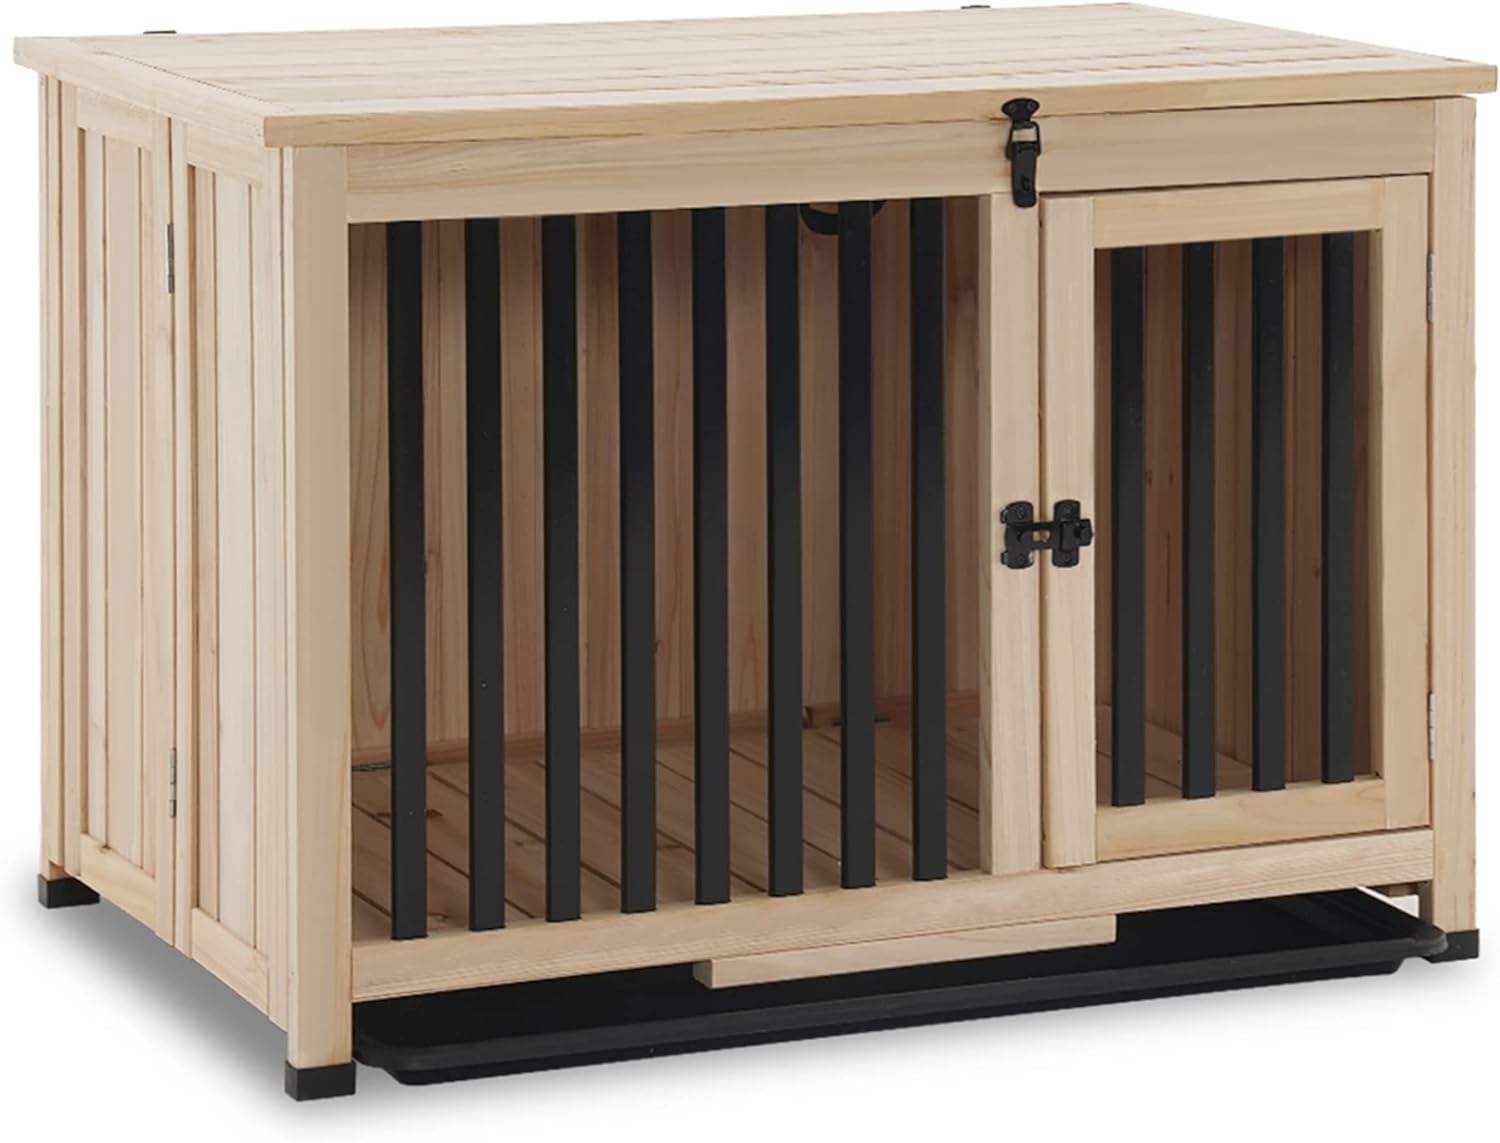 MCombo Wooden Dog Crate Furniture